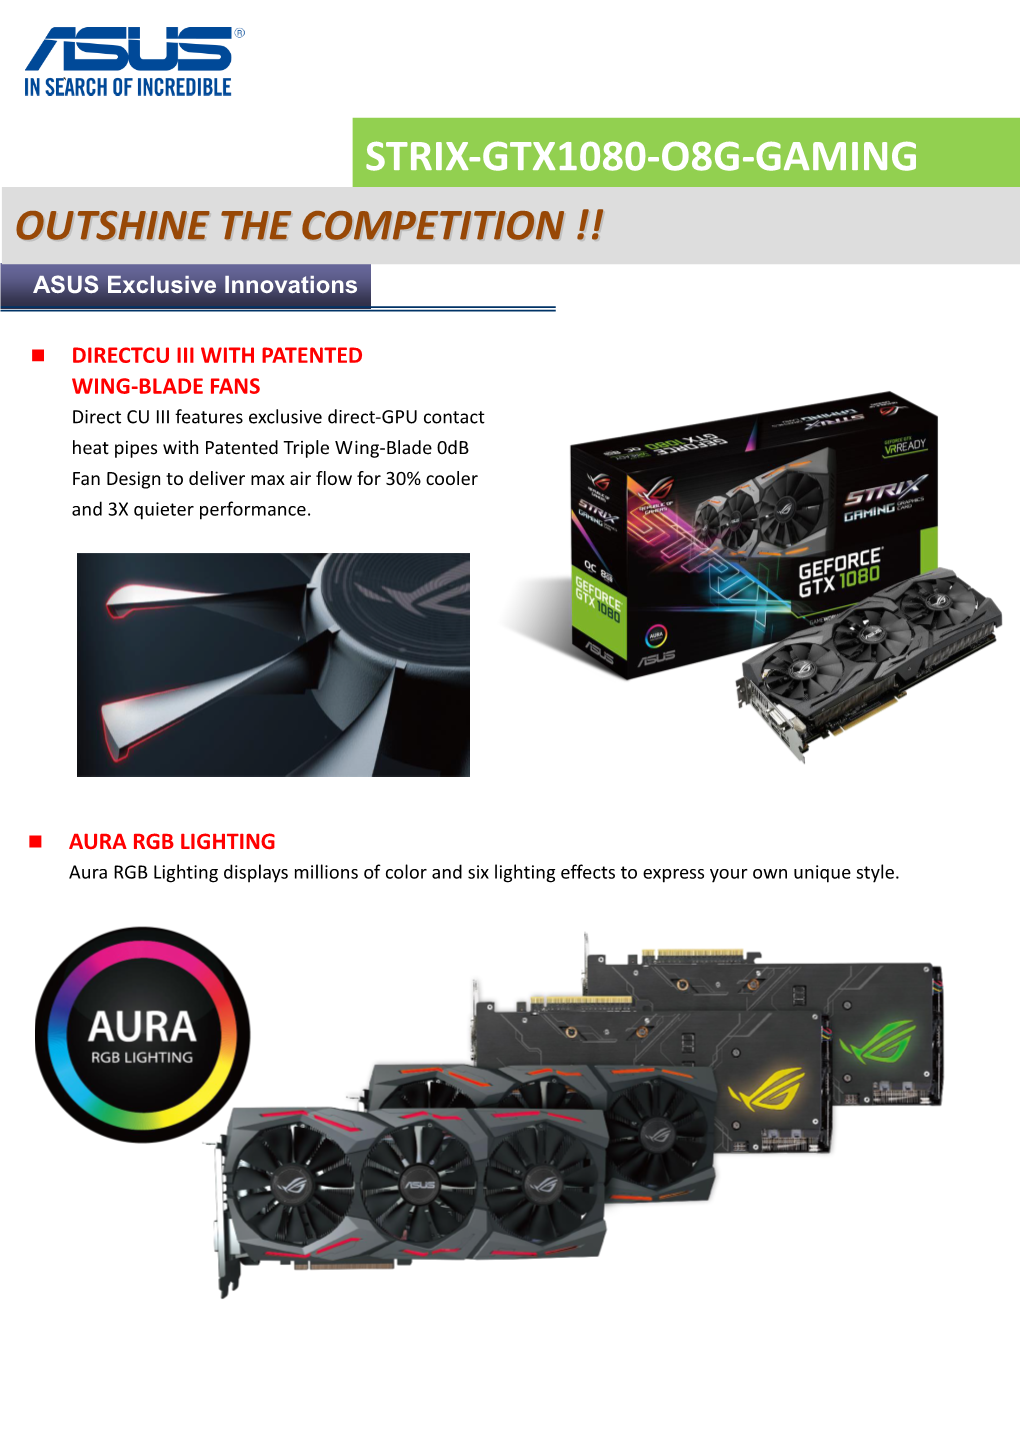 Strix-Gtx1080-O8g-Gaming Outshine the Competition !!